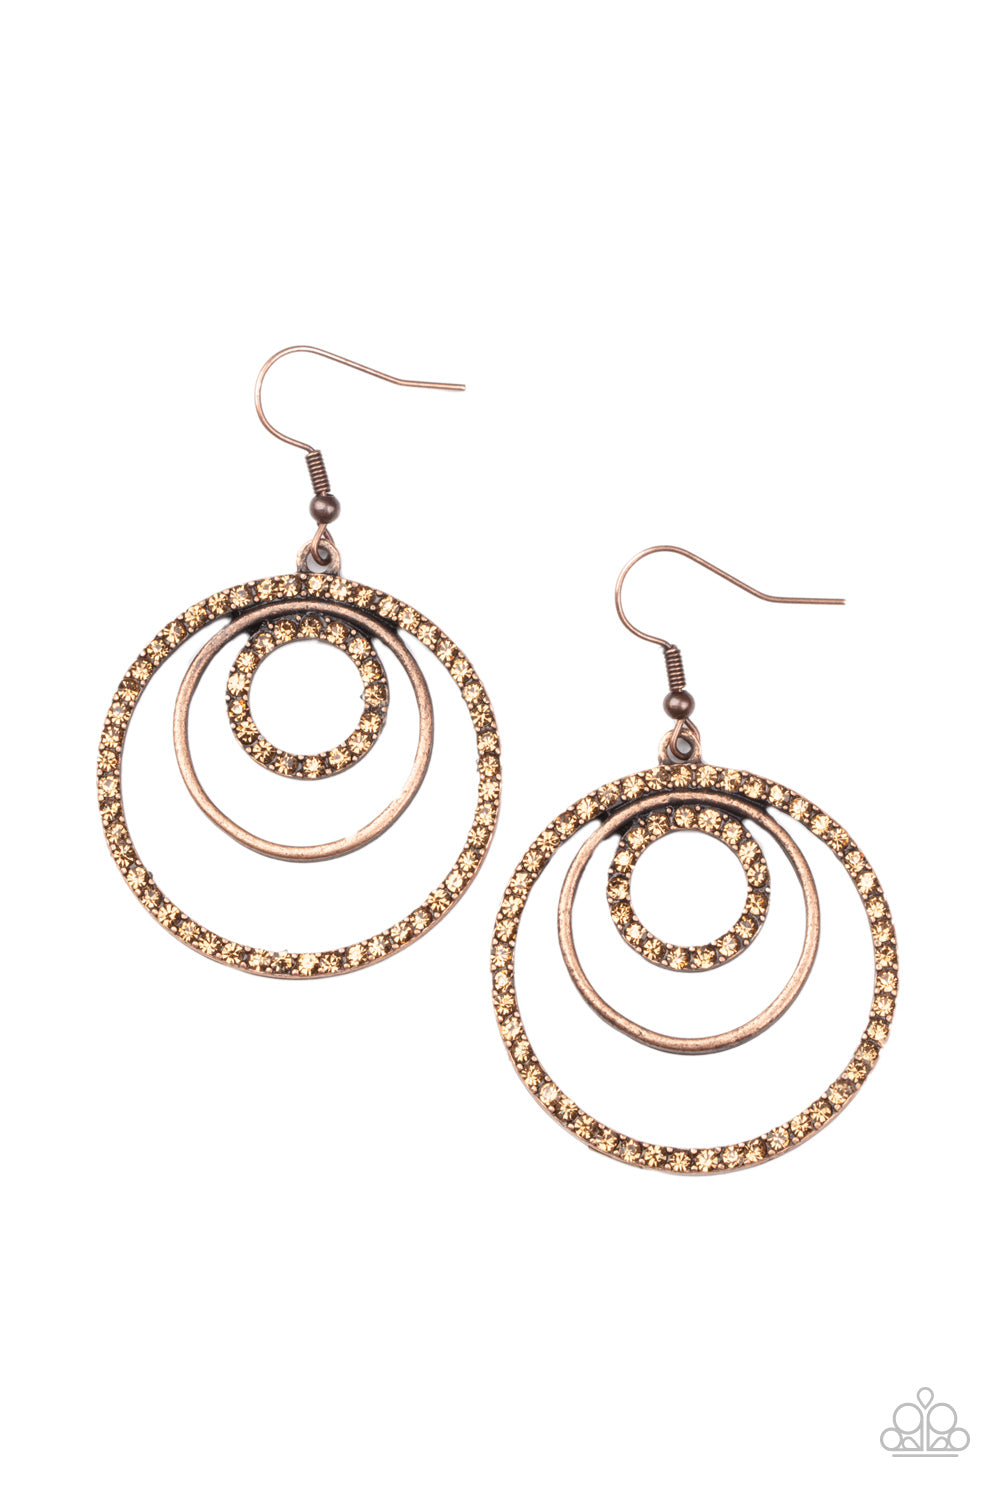 Bodaciously Bubbly - Copper Earrings - Princess Glam Shop